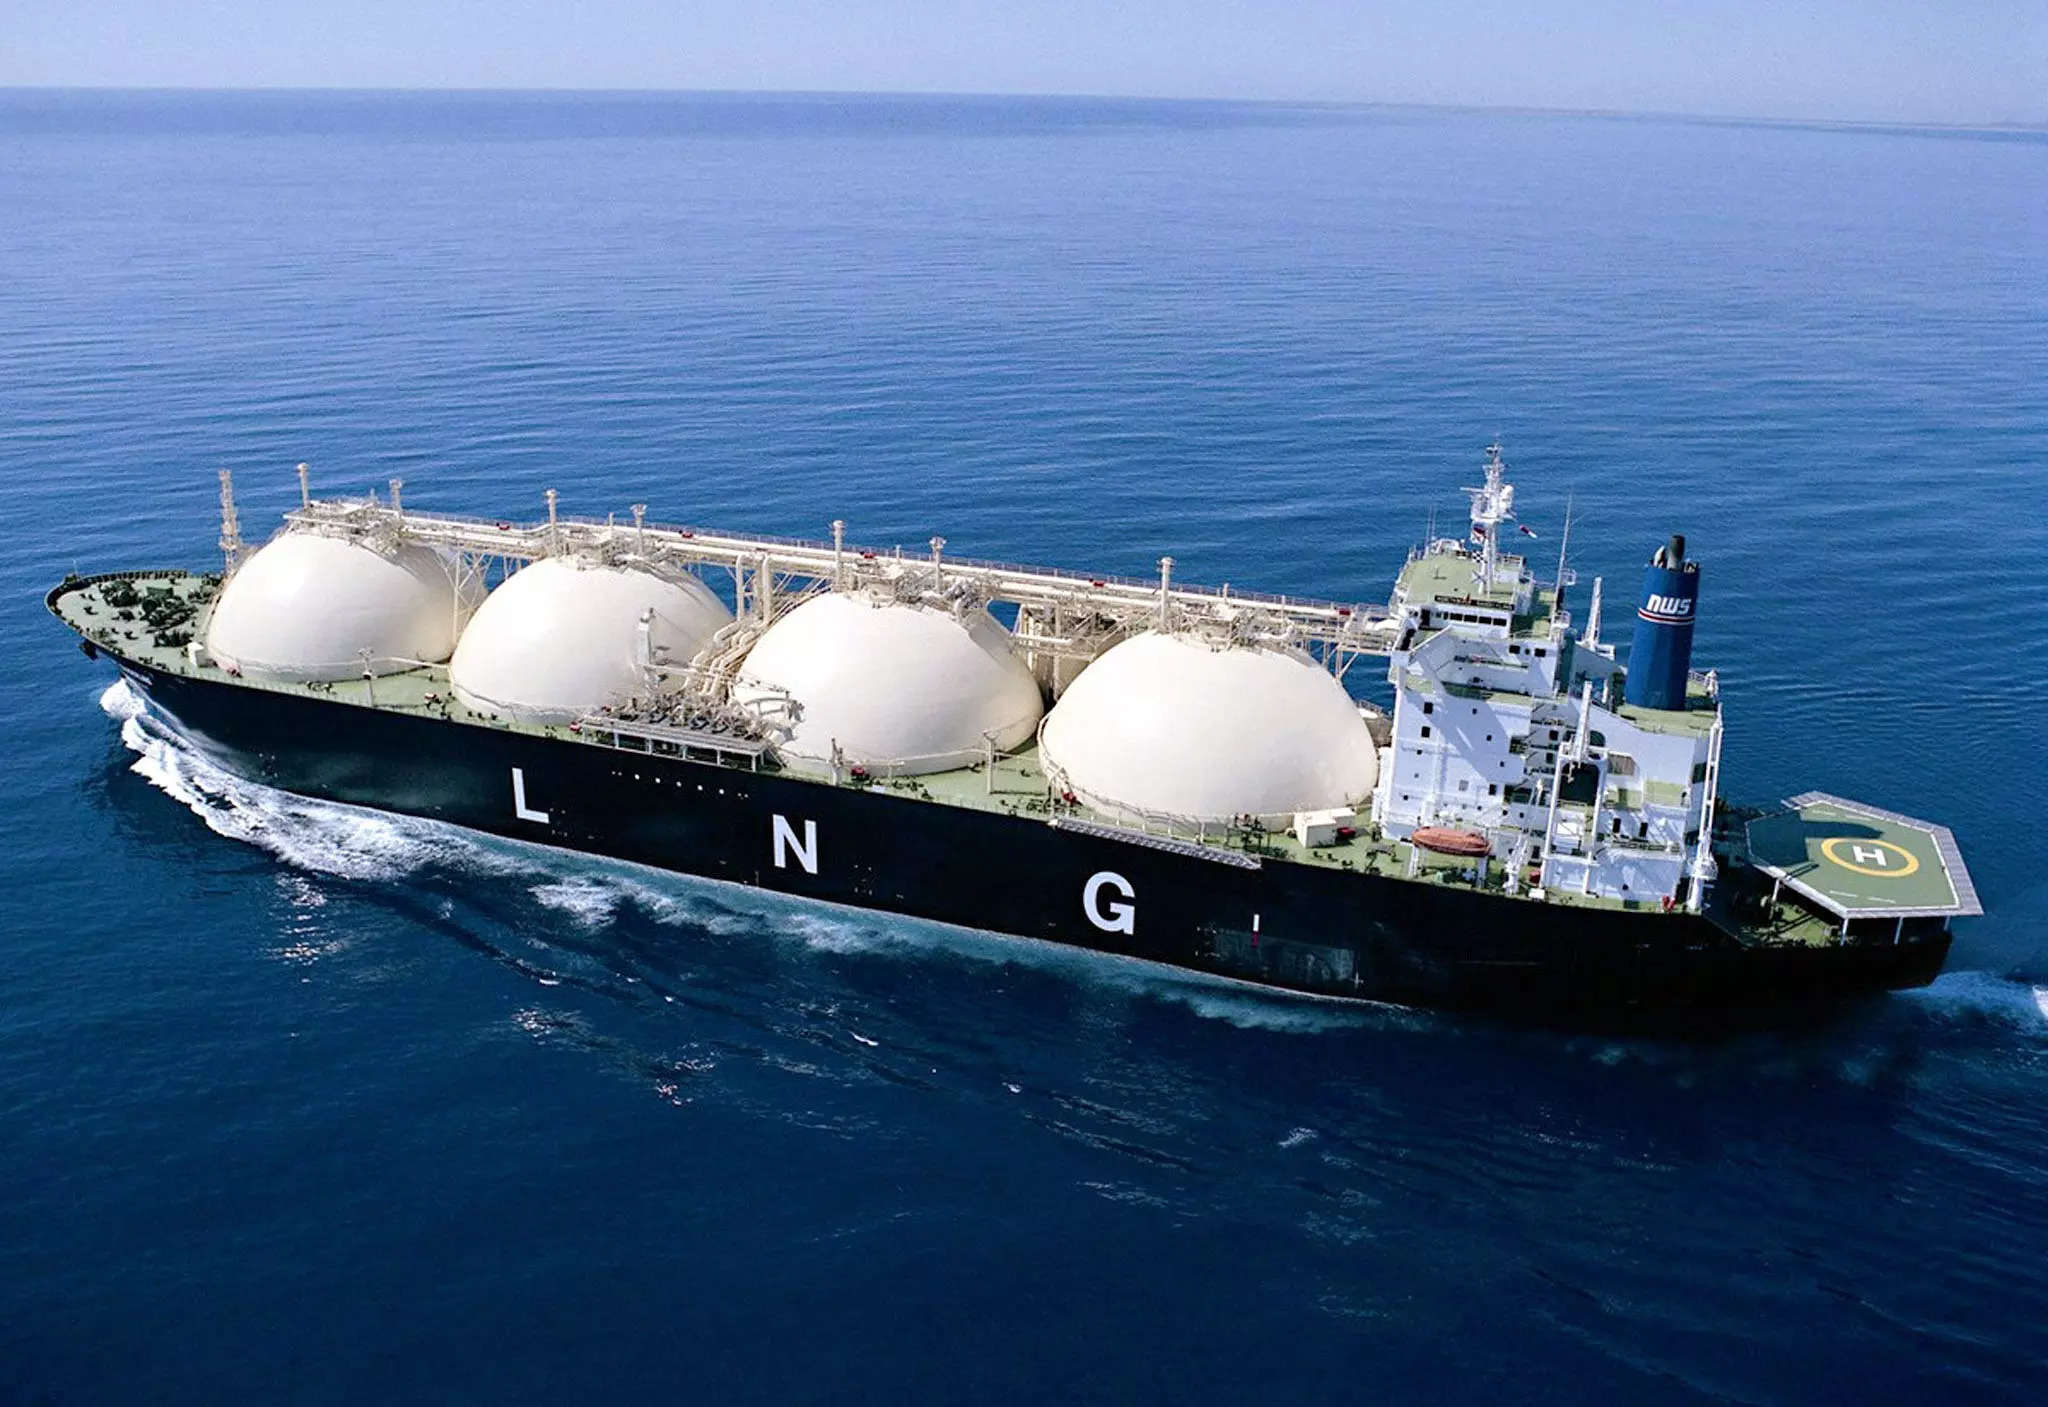 LNG ships now cost a record high of around 0,000 a day as Europe struggles to solve its gas crisis